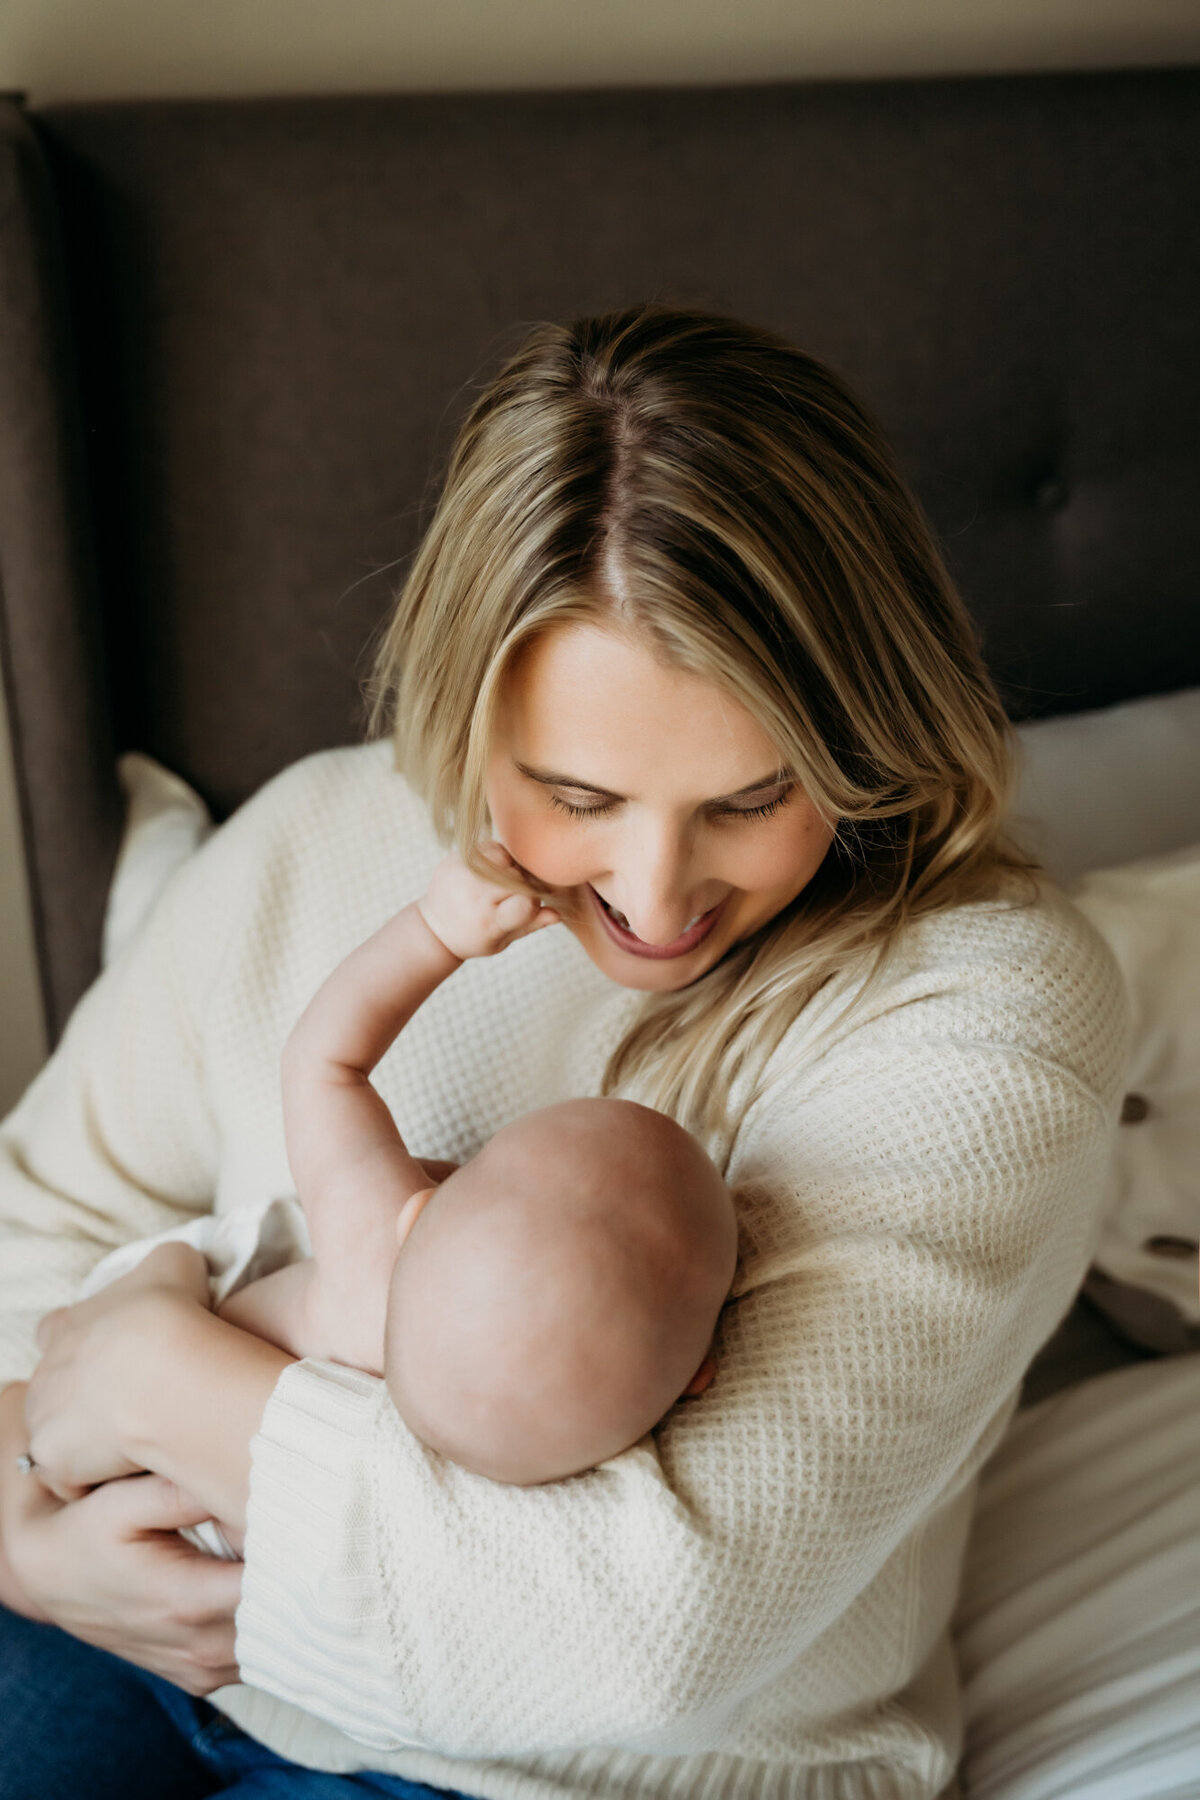 Newborn Photography, Mom is kissing baby and looking down at her, while wearing a white sweater and sitting on the bed. Baby's hand is on mom's face.